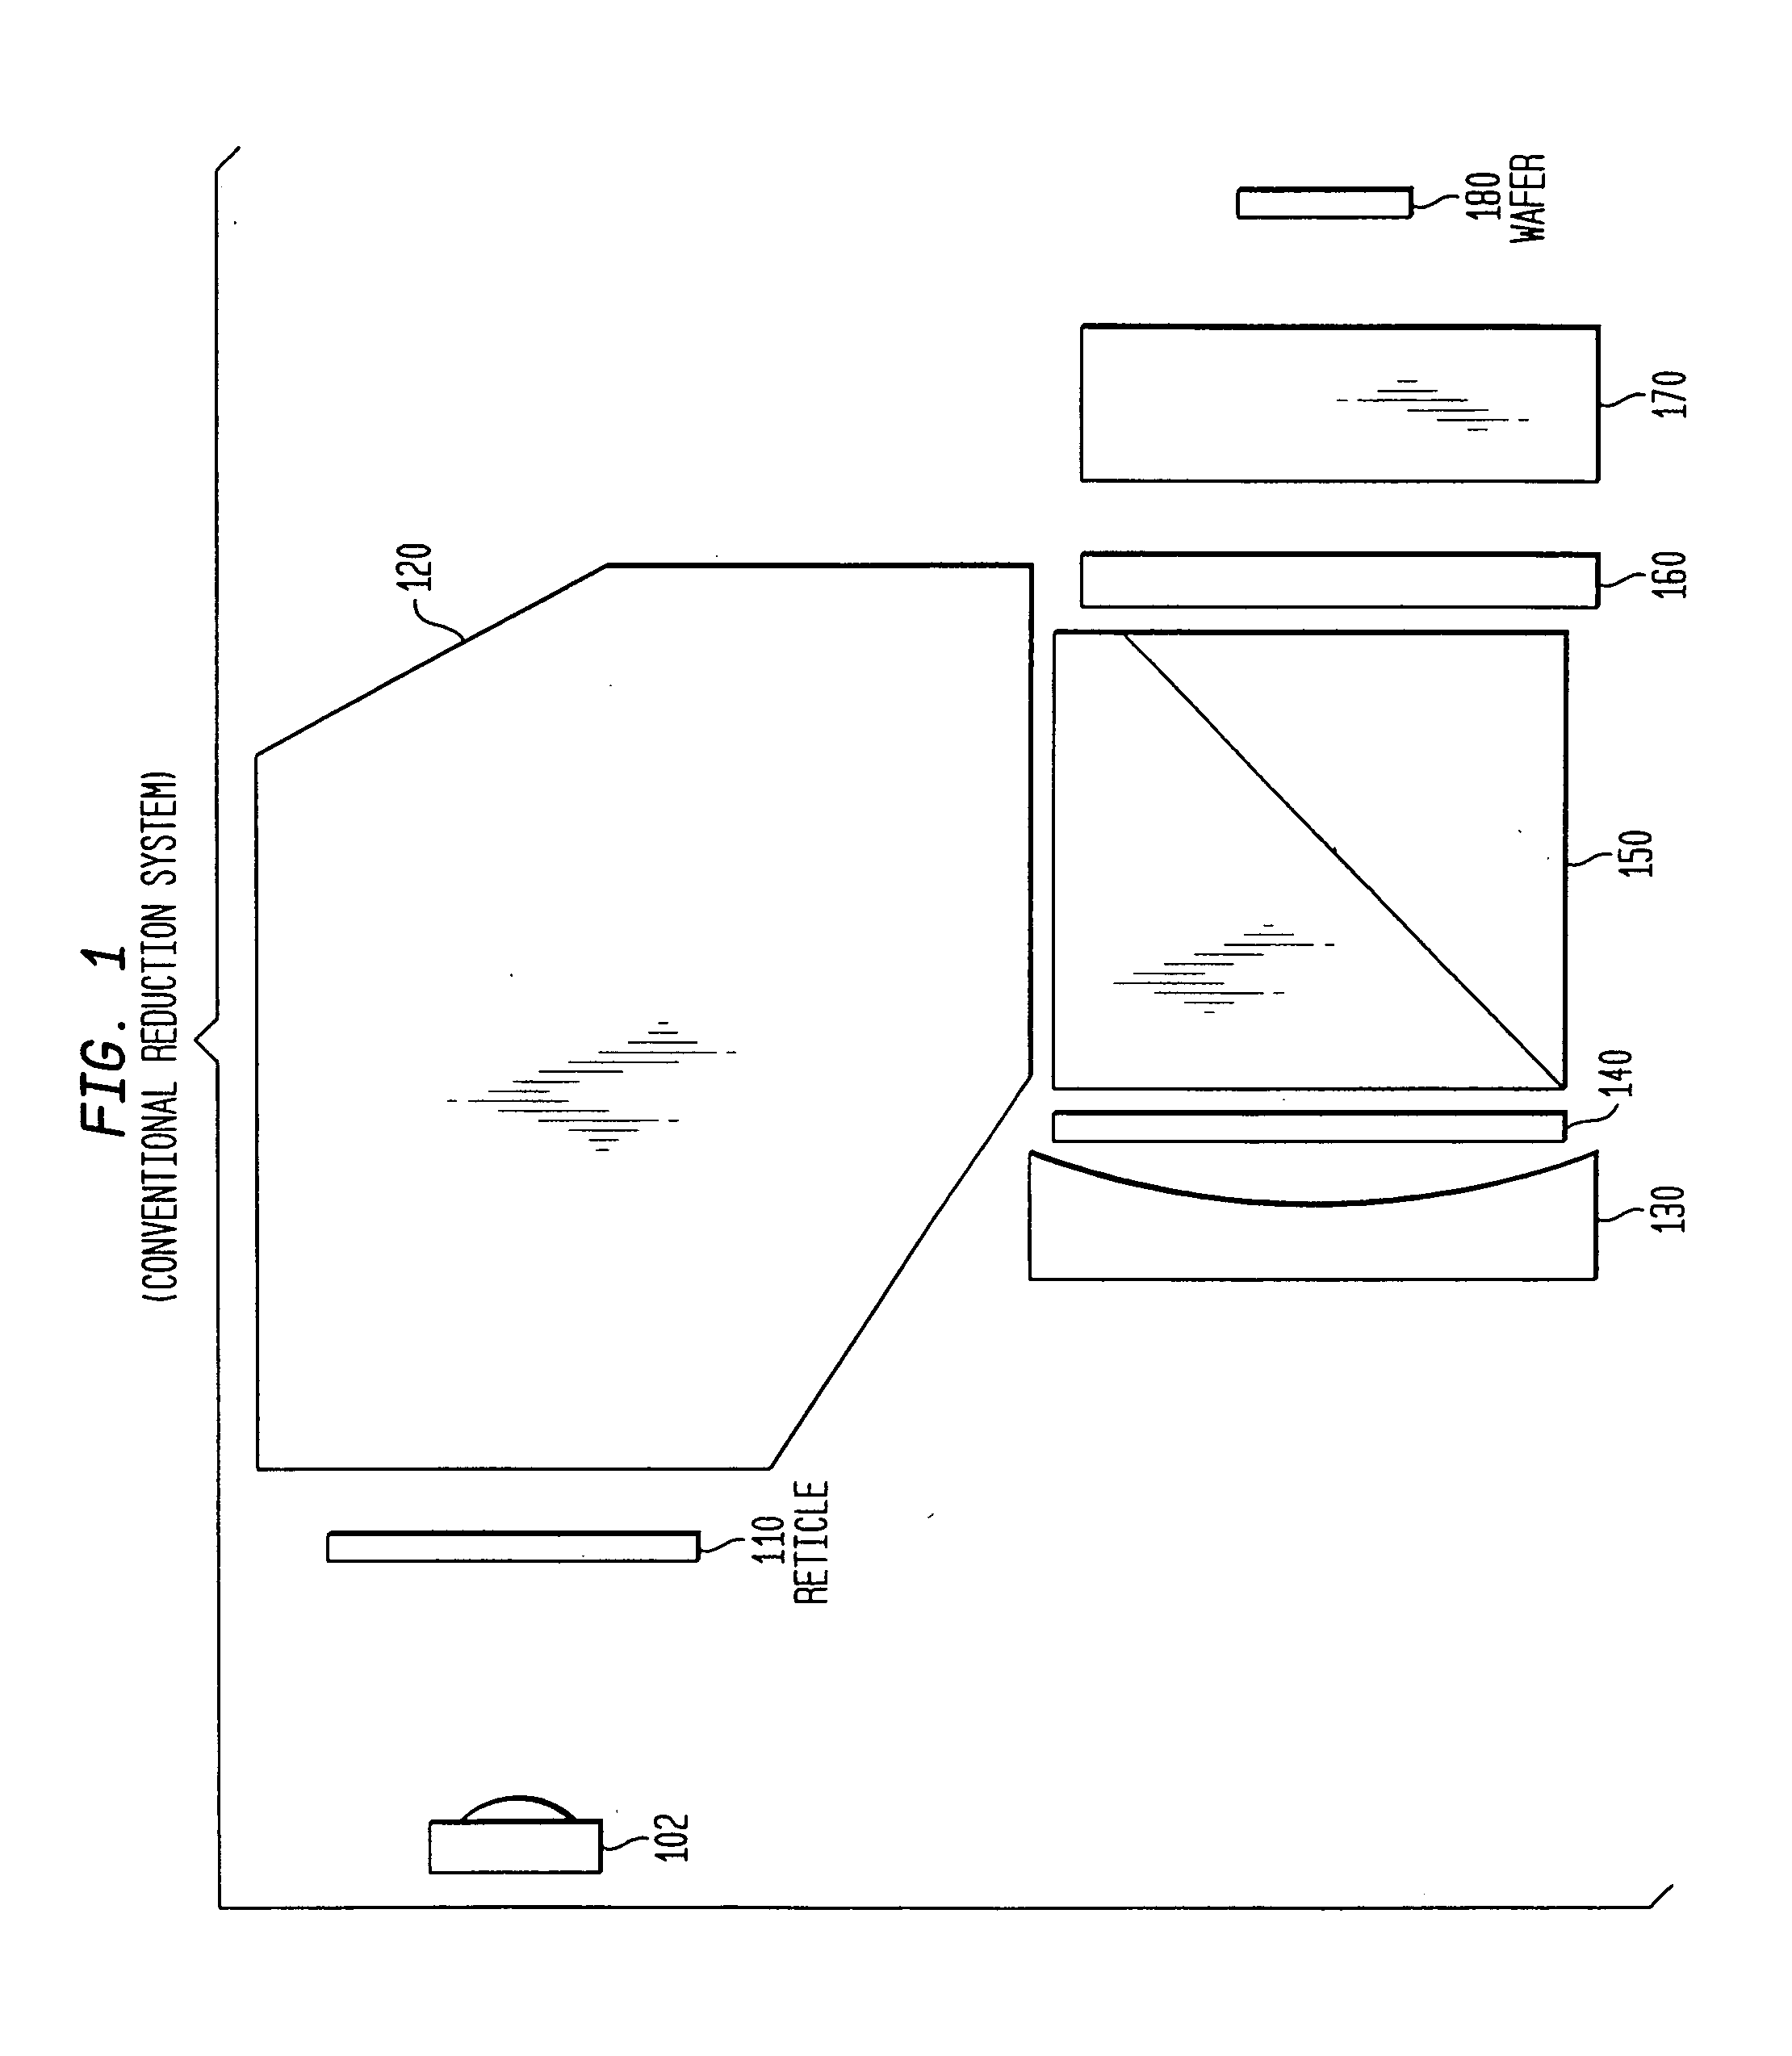 Optical reduction system with elimination of reticle diffraction induced bias